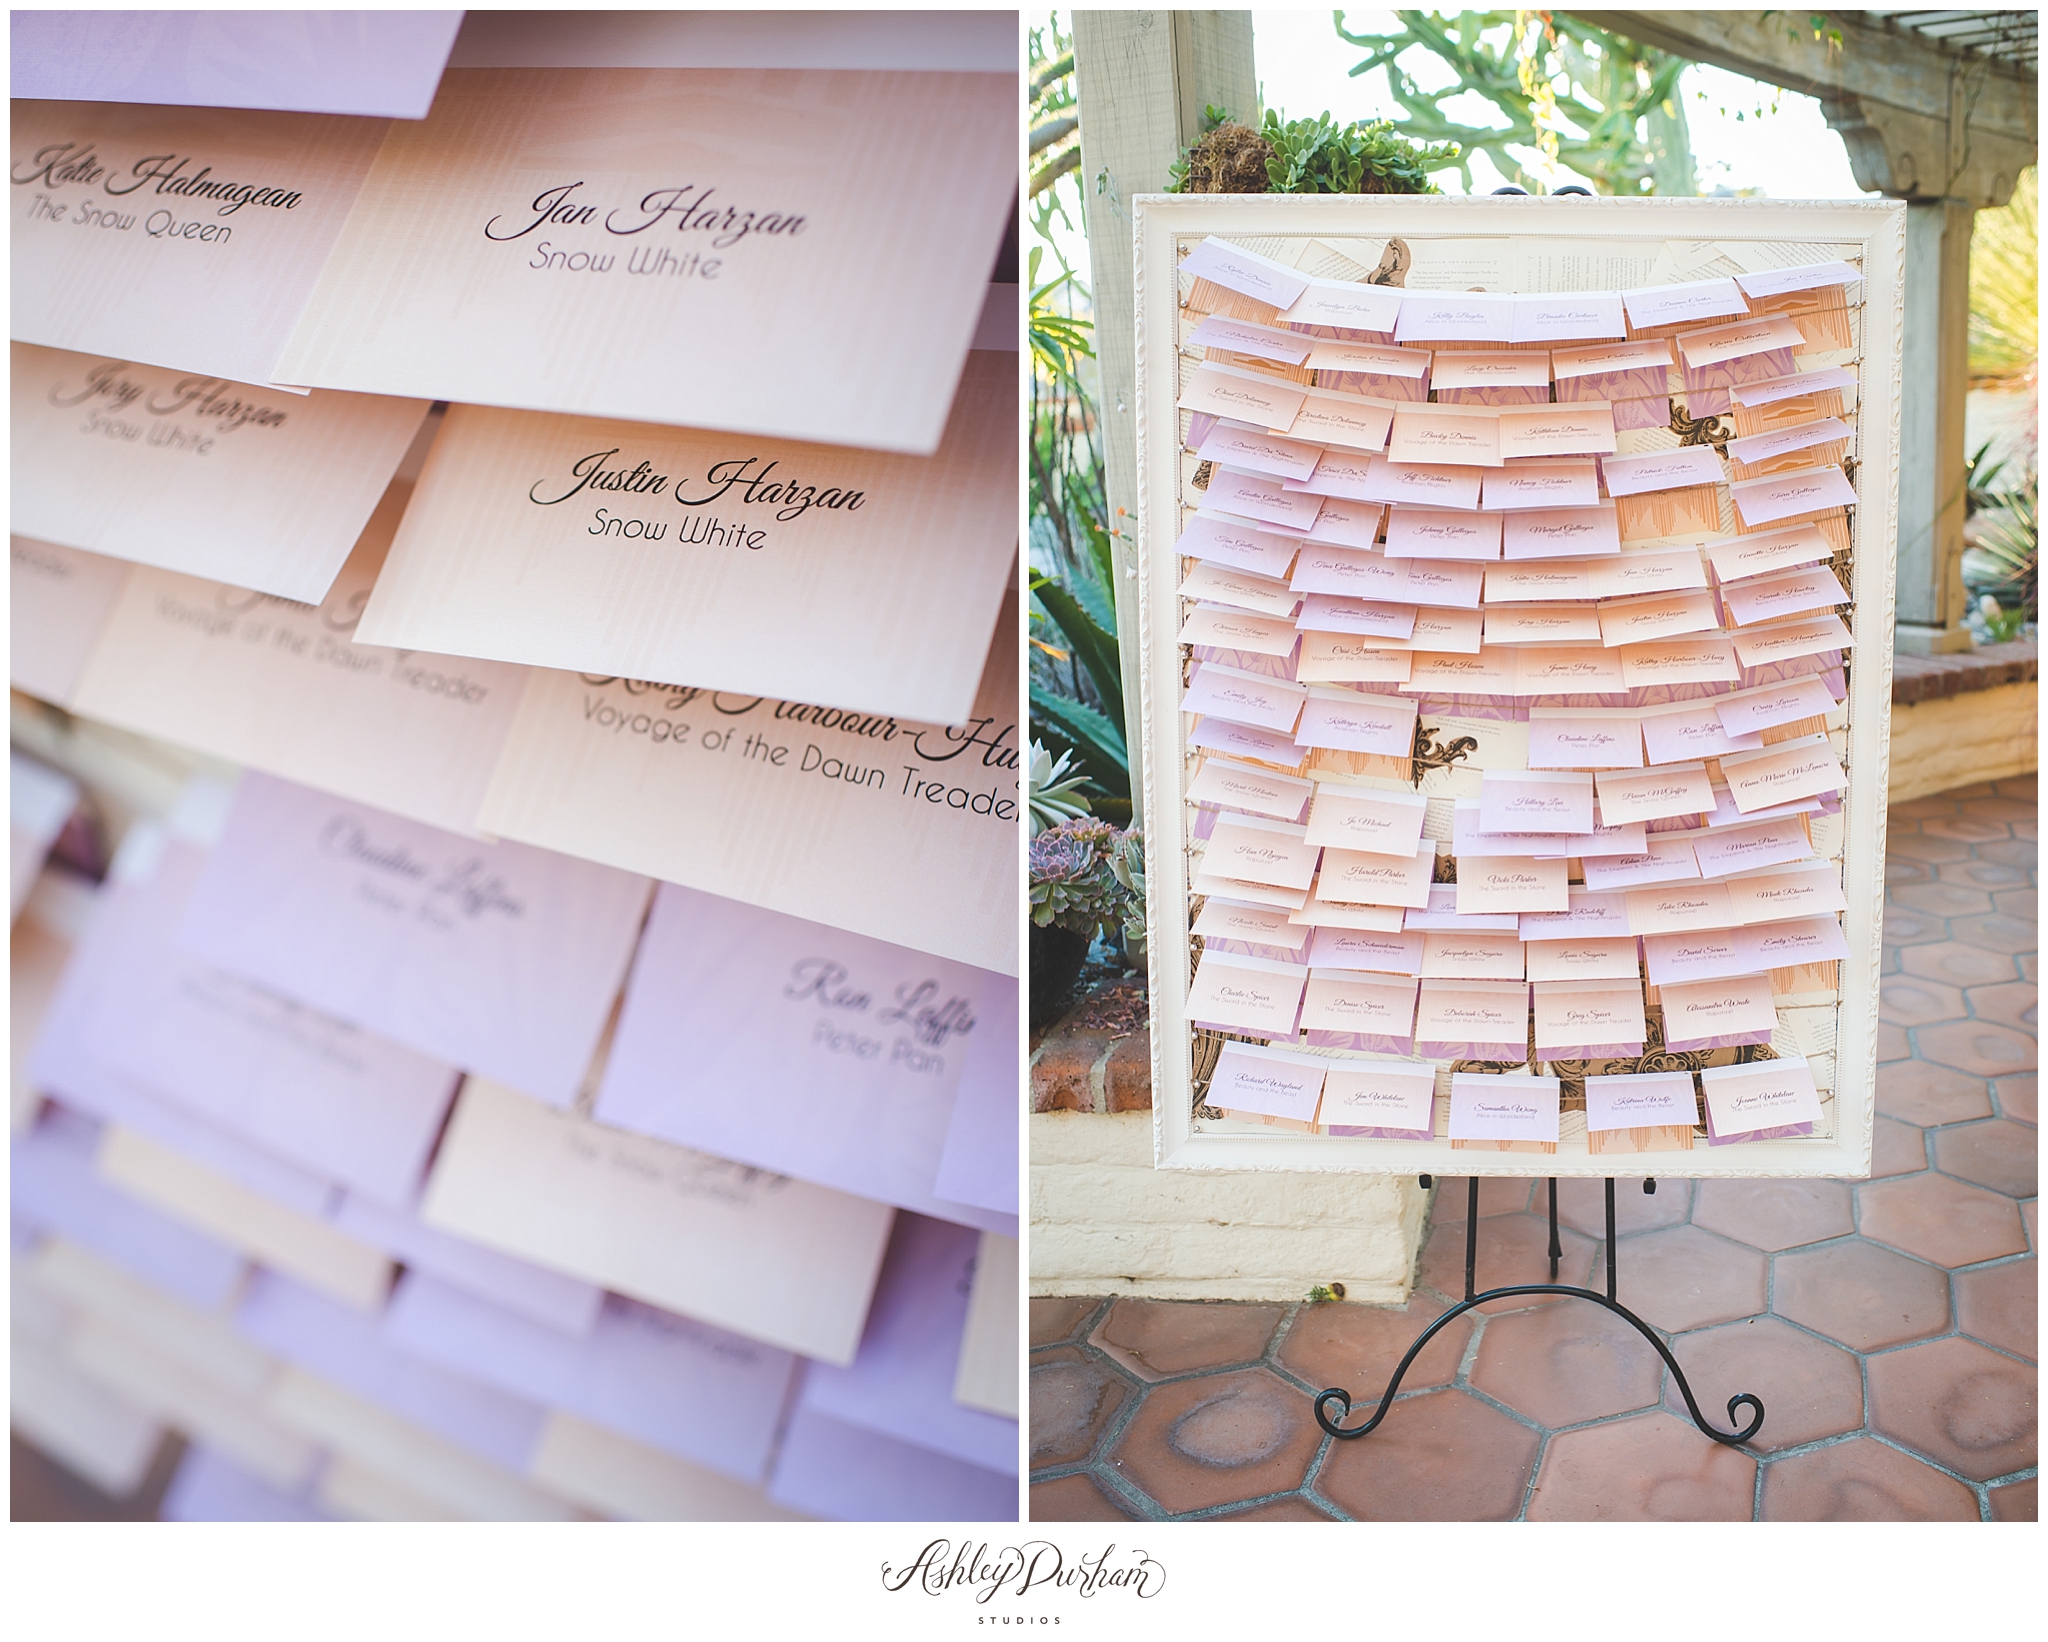 newport beach wedding, sherman gardens wedding, sherman library wedding, fairytale themed wedding, how to plan a fairytale wedding, pink and silver wedding, fairytale wedding centerpieces, fairytale seating arrangement, how to make a seating chart